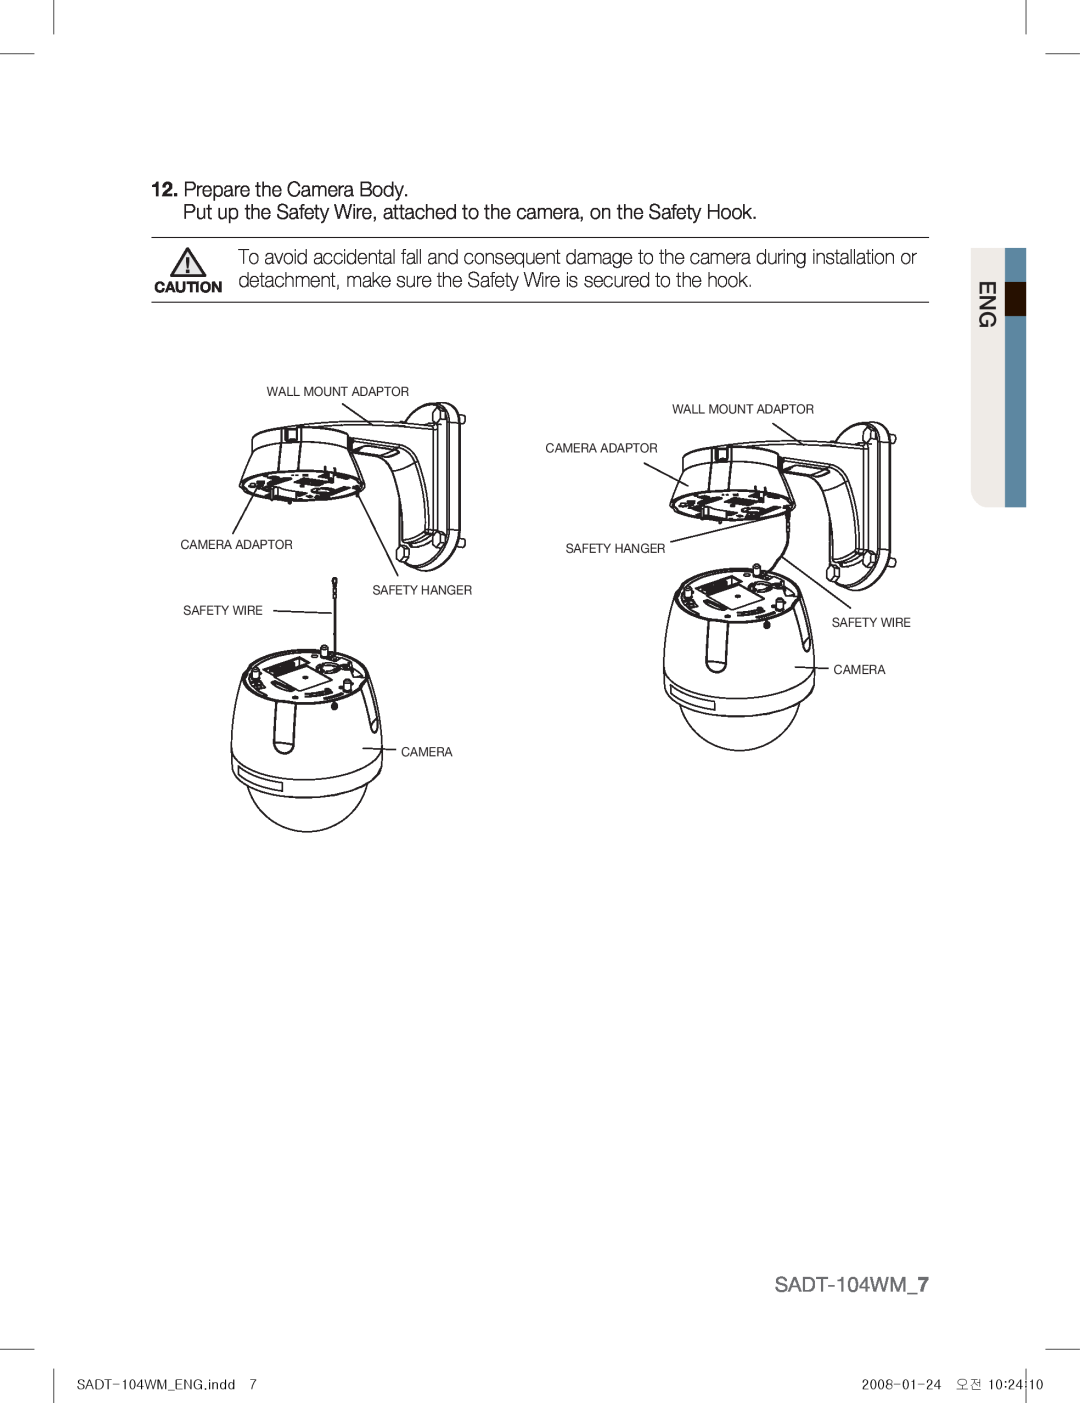 Samsung SADT-104WM manual Prepare the Camera Body, Put up the Safety Wire, attached to the camera, on the Safety Hook 